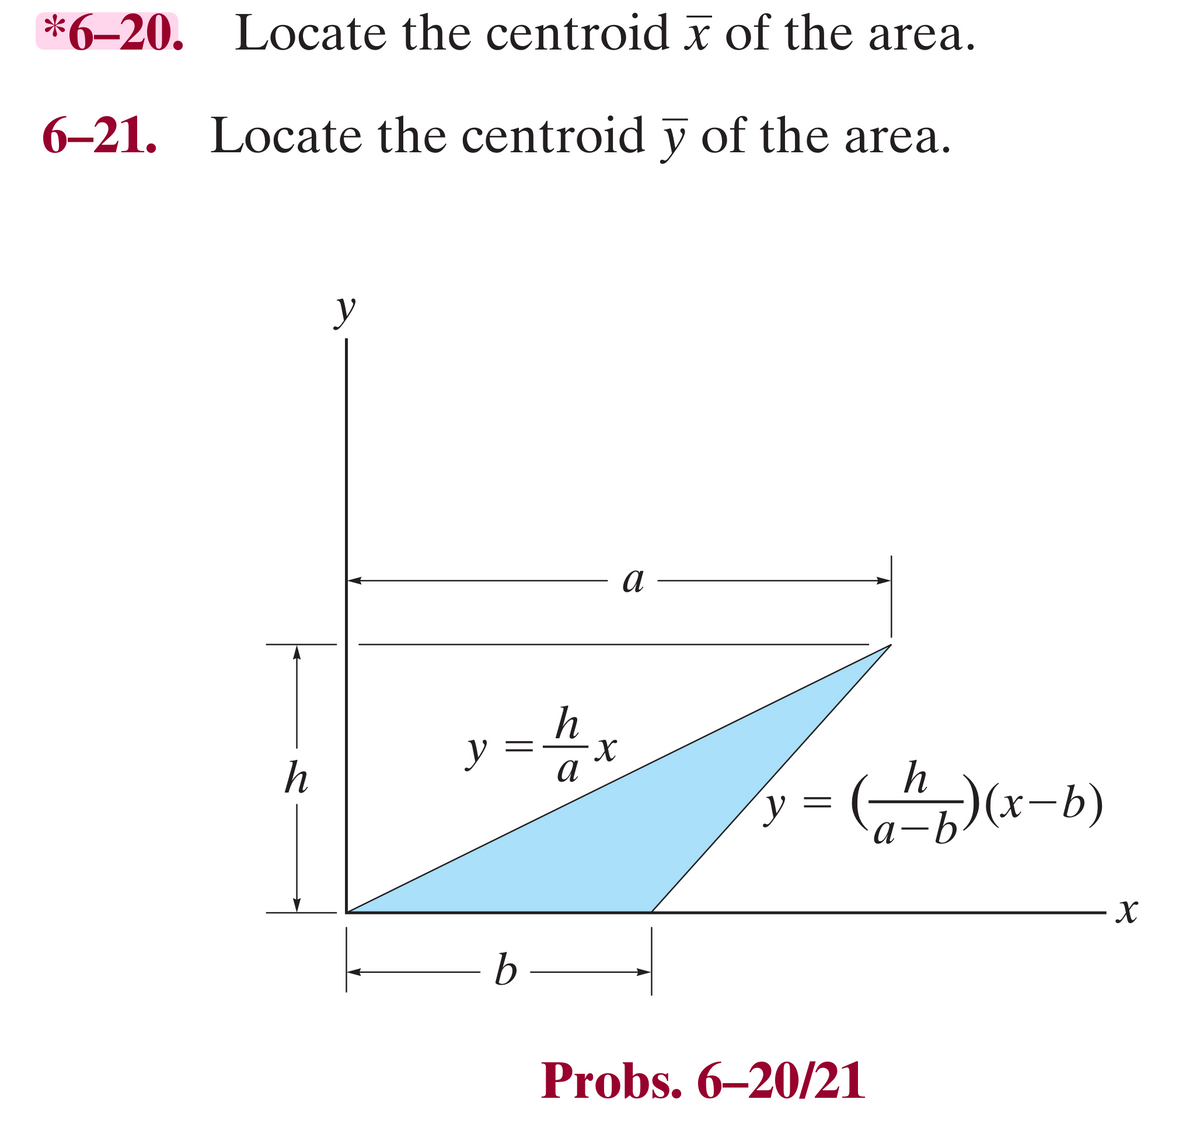 *6-20. Locate the centroid x of the area.
6-21. Locate the centroid y of the area.
h
y
y=
b
h
а
X
а
y
=
Probs. 6-20/21
h
a-b) (x-b)
X